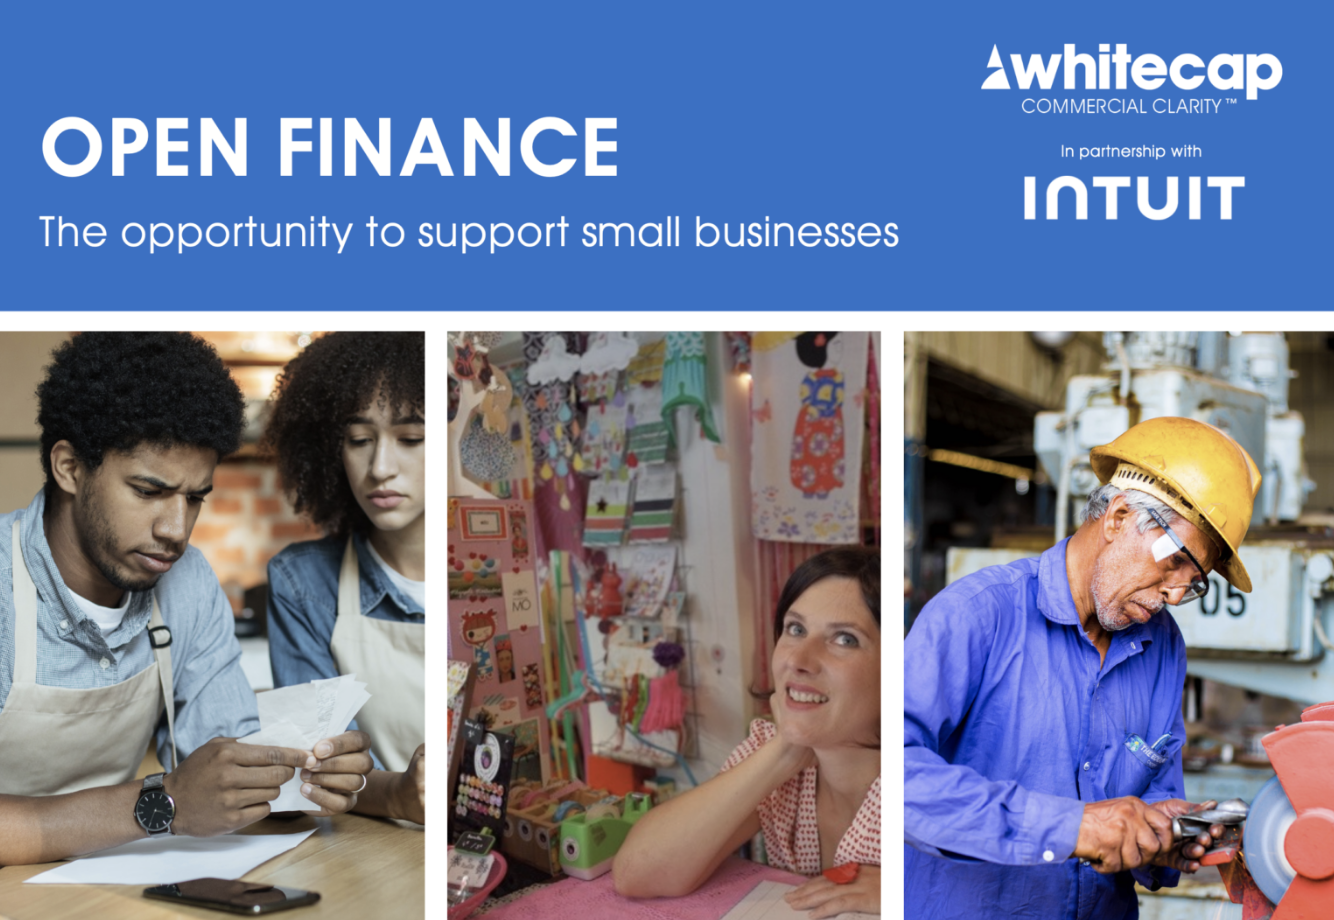 New report from Whitecap Consulting highlights Open Finance opportunities for small businesses